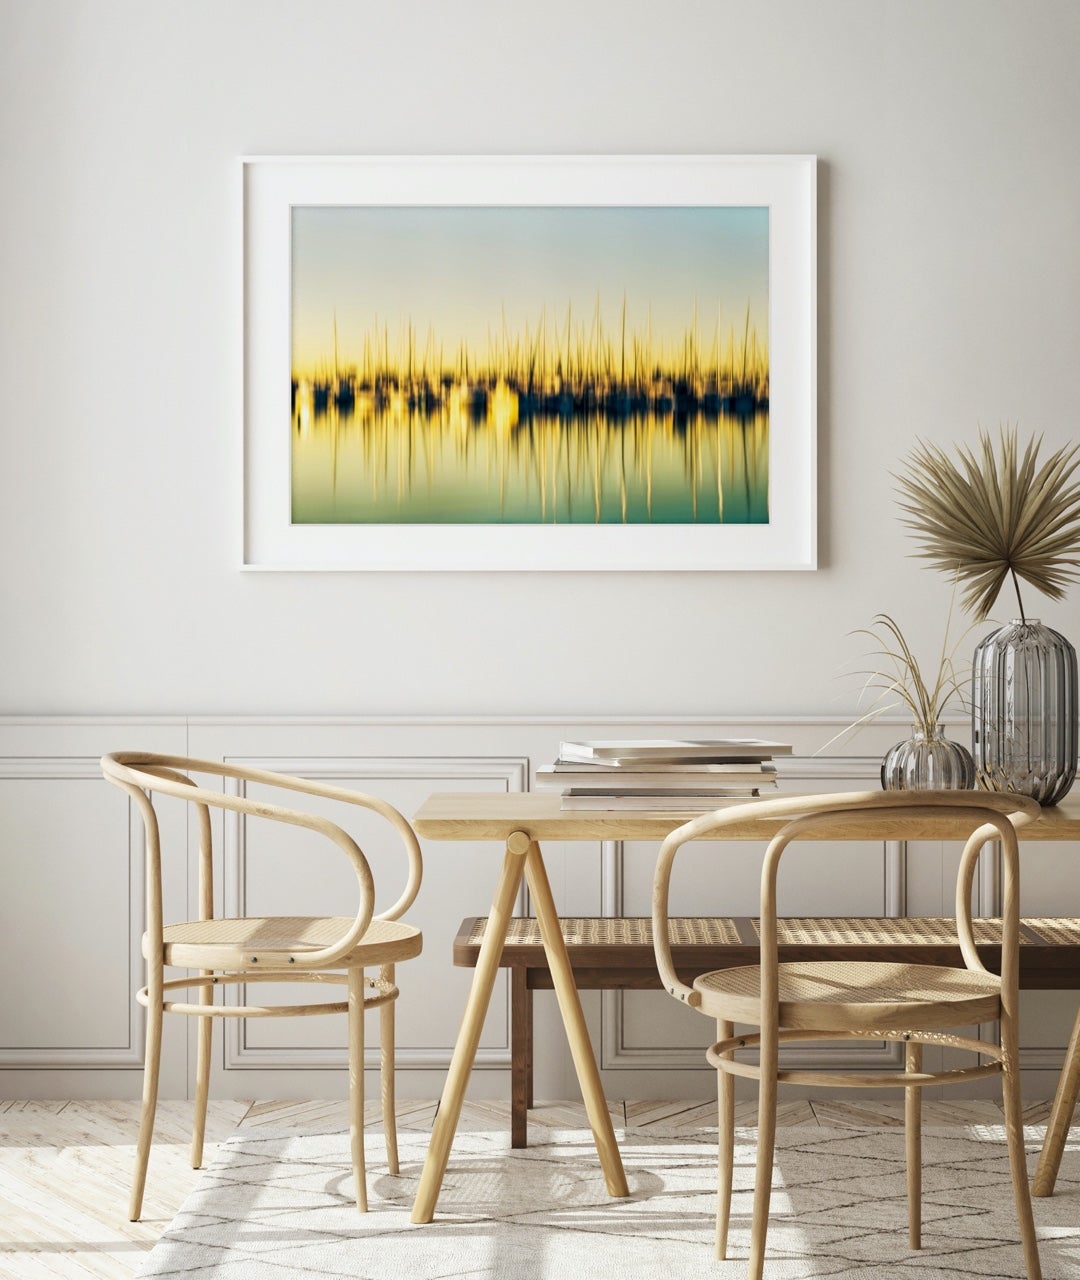 San Diego Wall Art & Photography Prints | MK Envision Galleries